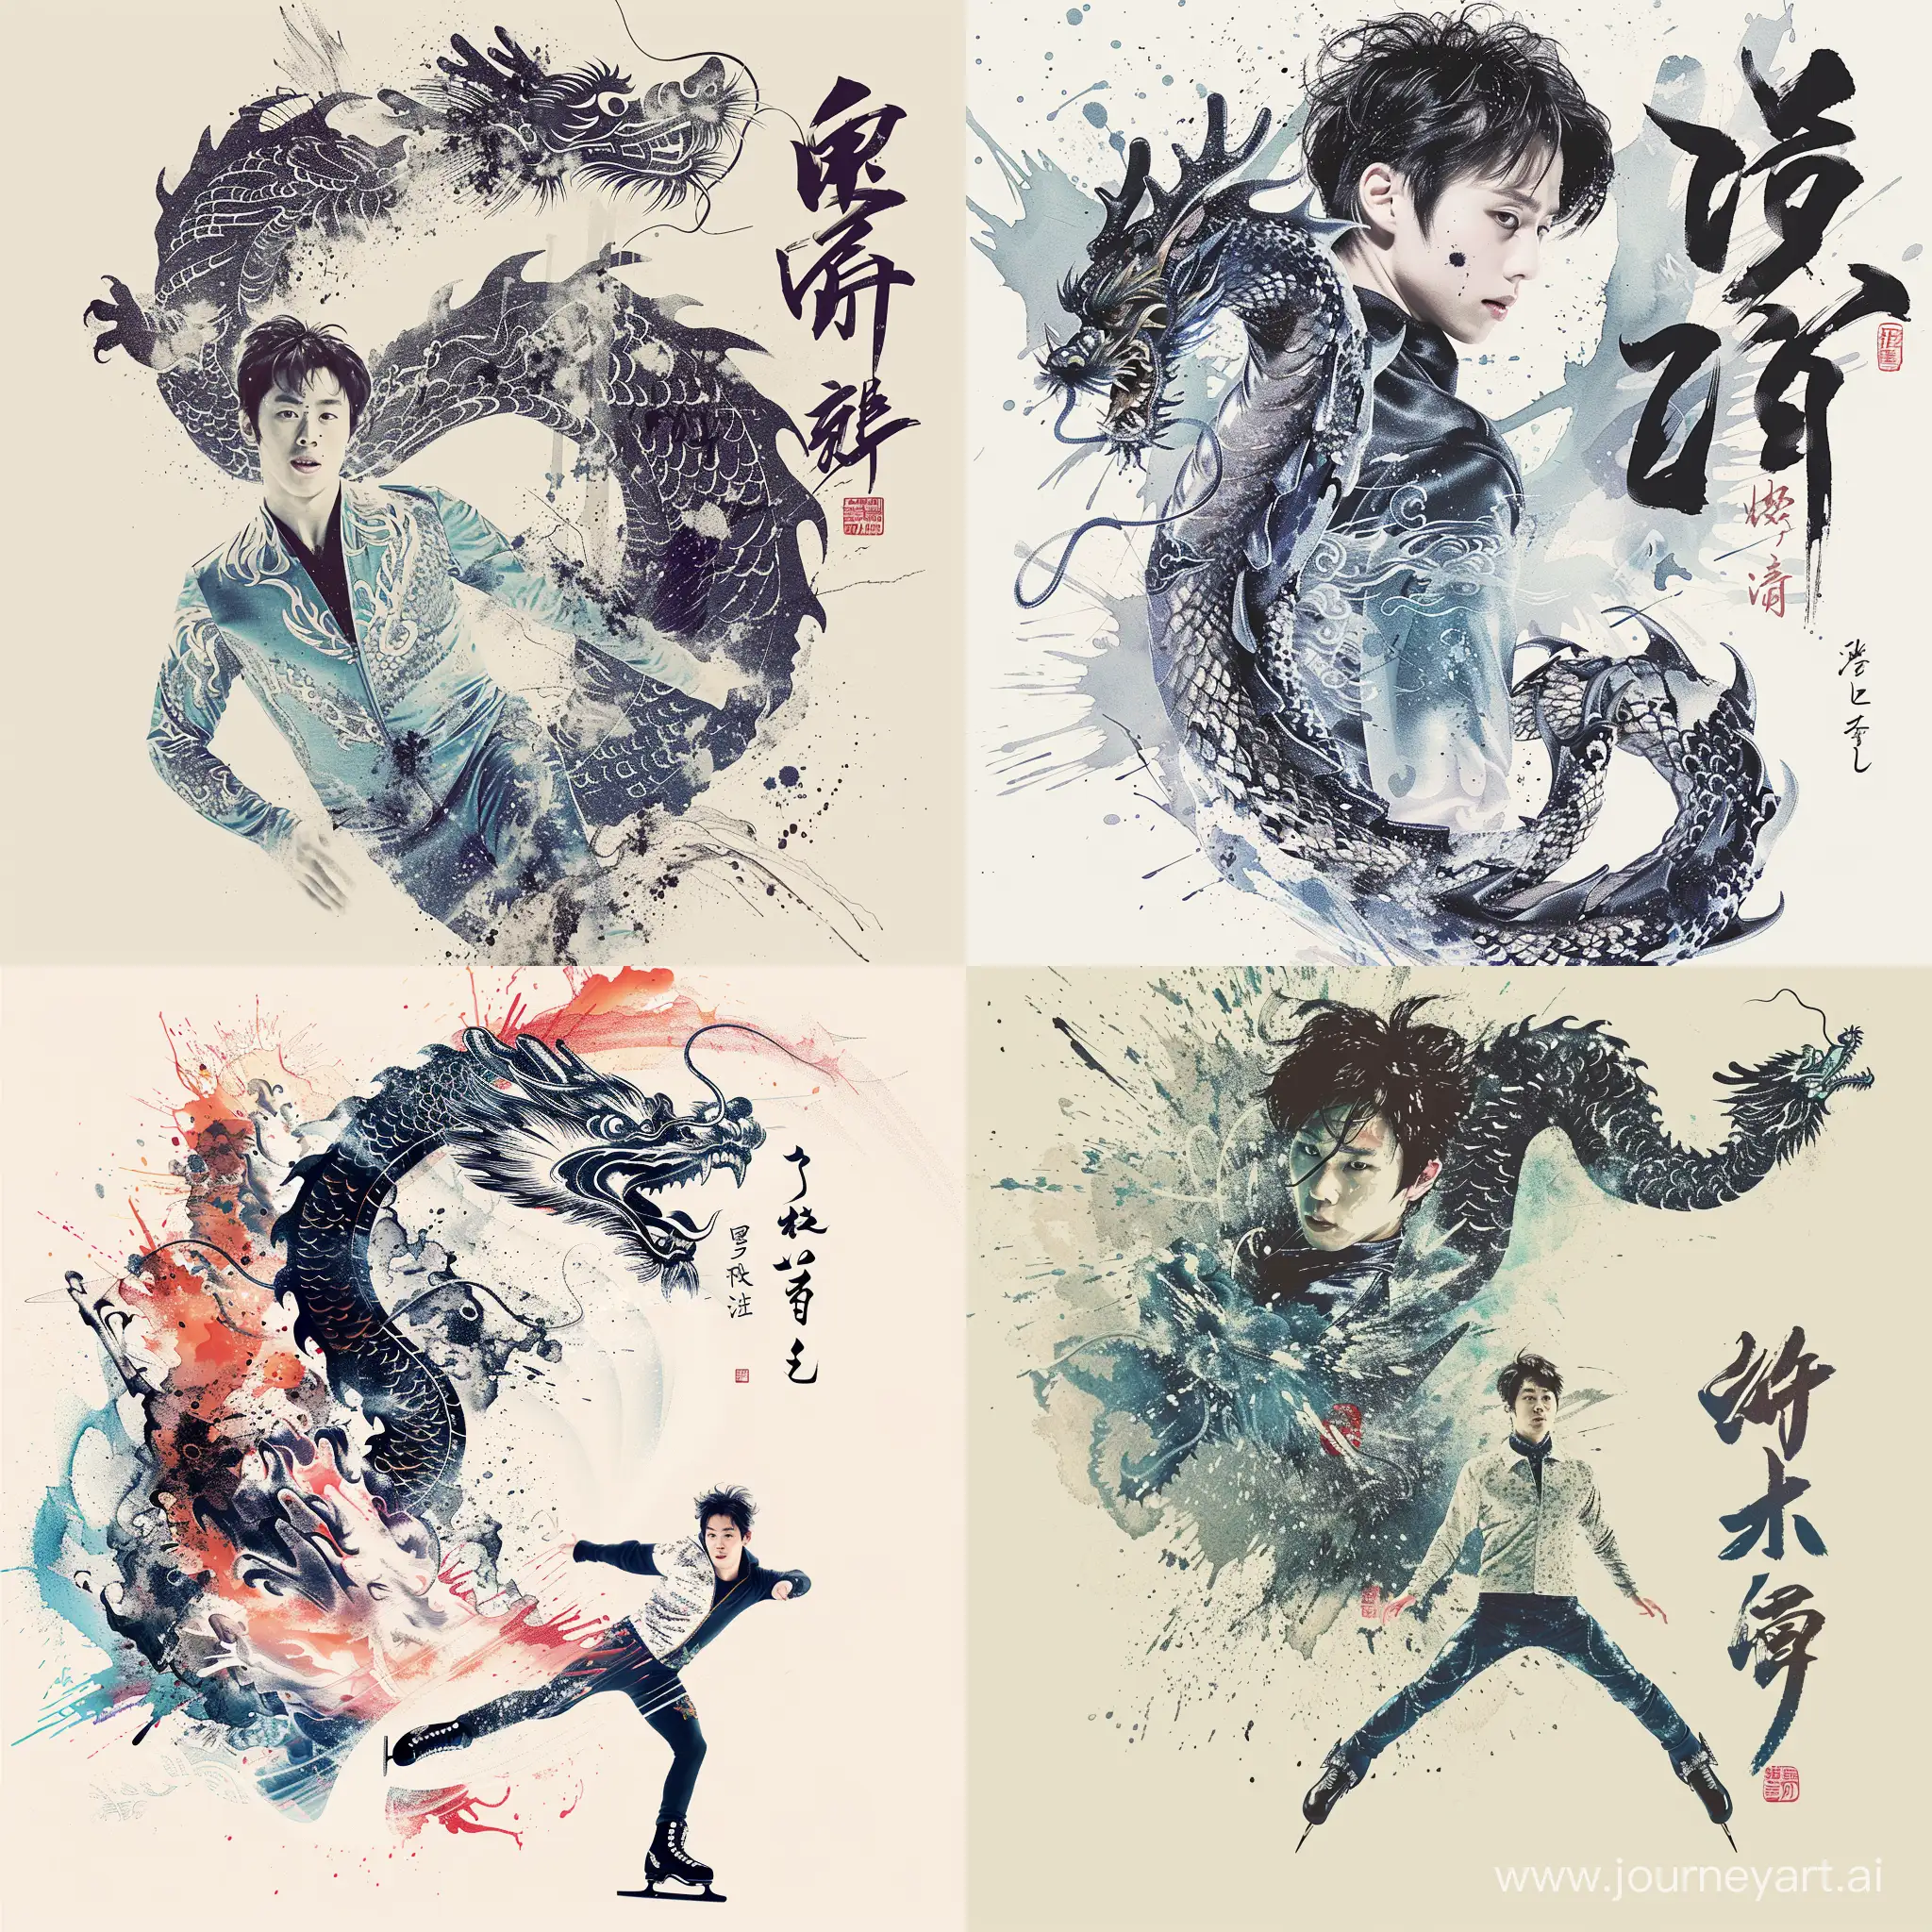 Create an image that blends Chinese calligraphy art with elements representative of Yuzuru Hanyu, a renowned Japanese figure skater. The central theme should revolve around the concept of a Chinese dragon intertwined with Yuzuru's dynamic figure skating poses. Emphasize the artistic harmony between traditional Chinese aesthetics and the fluidity of figure skating.